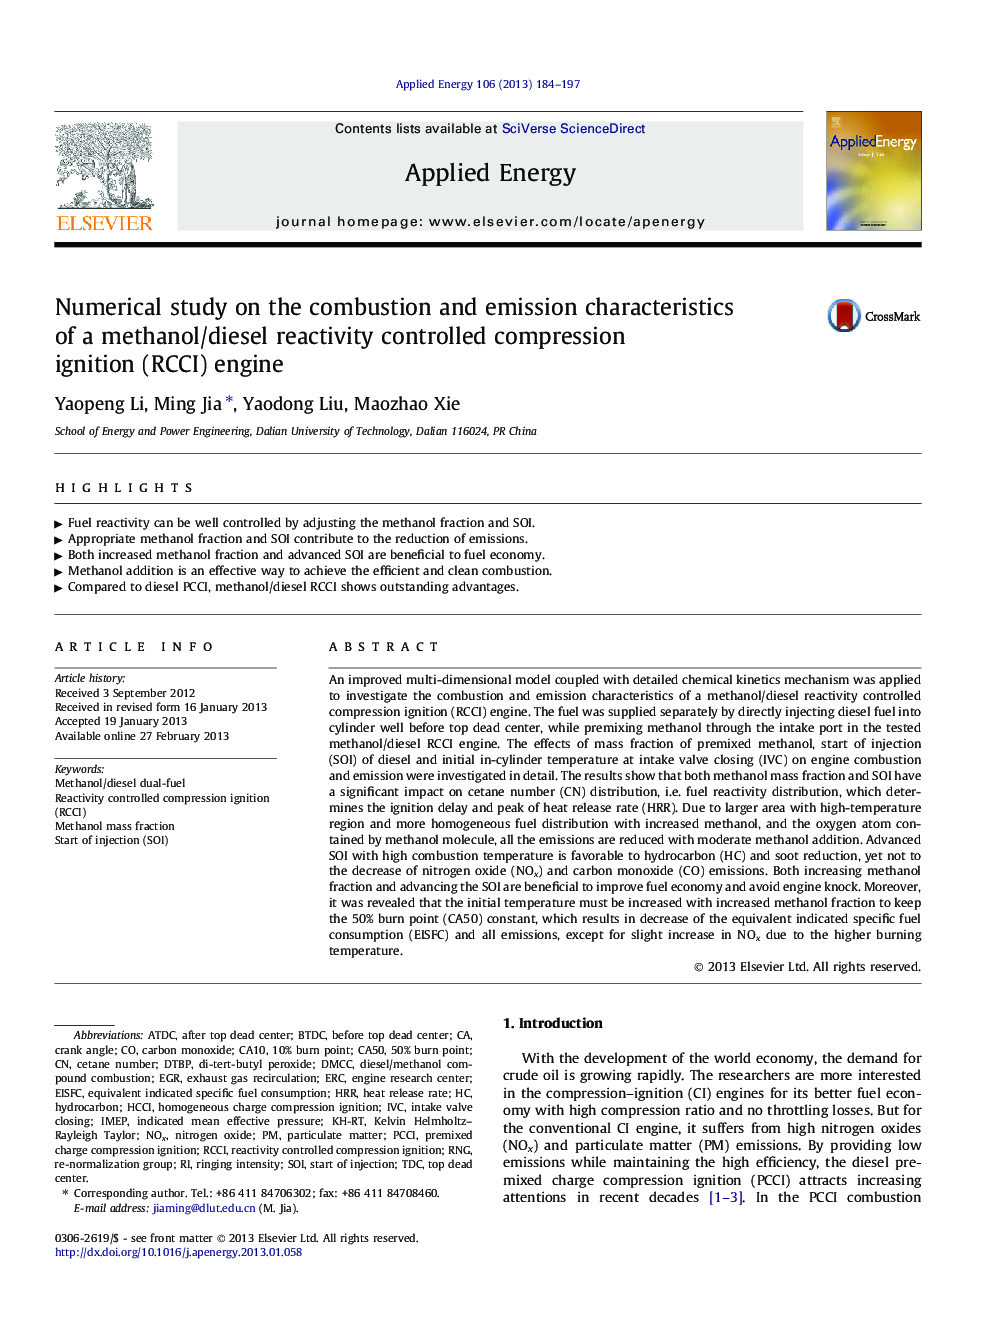 Numerical study on the combustion and emission characteristics of a methanol/diesel reactivity controlled compression ignition (RCCI) engine